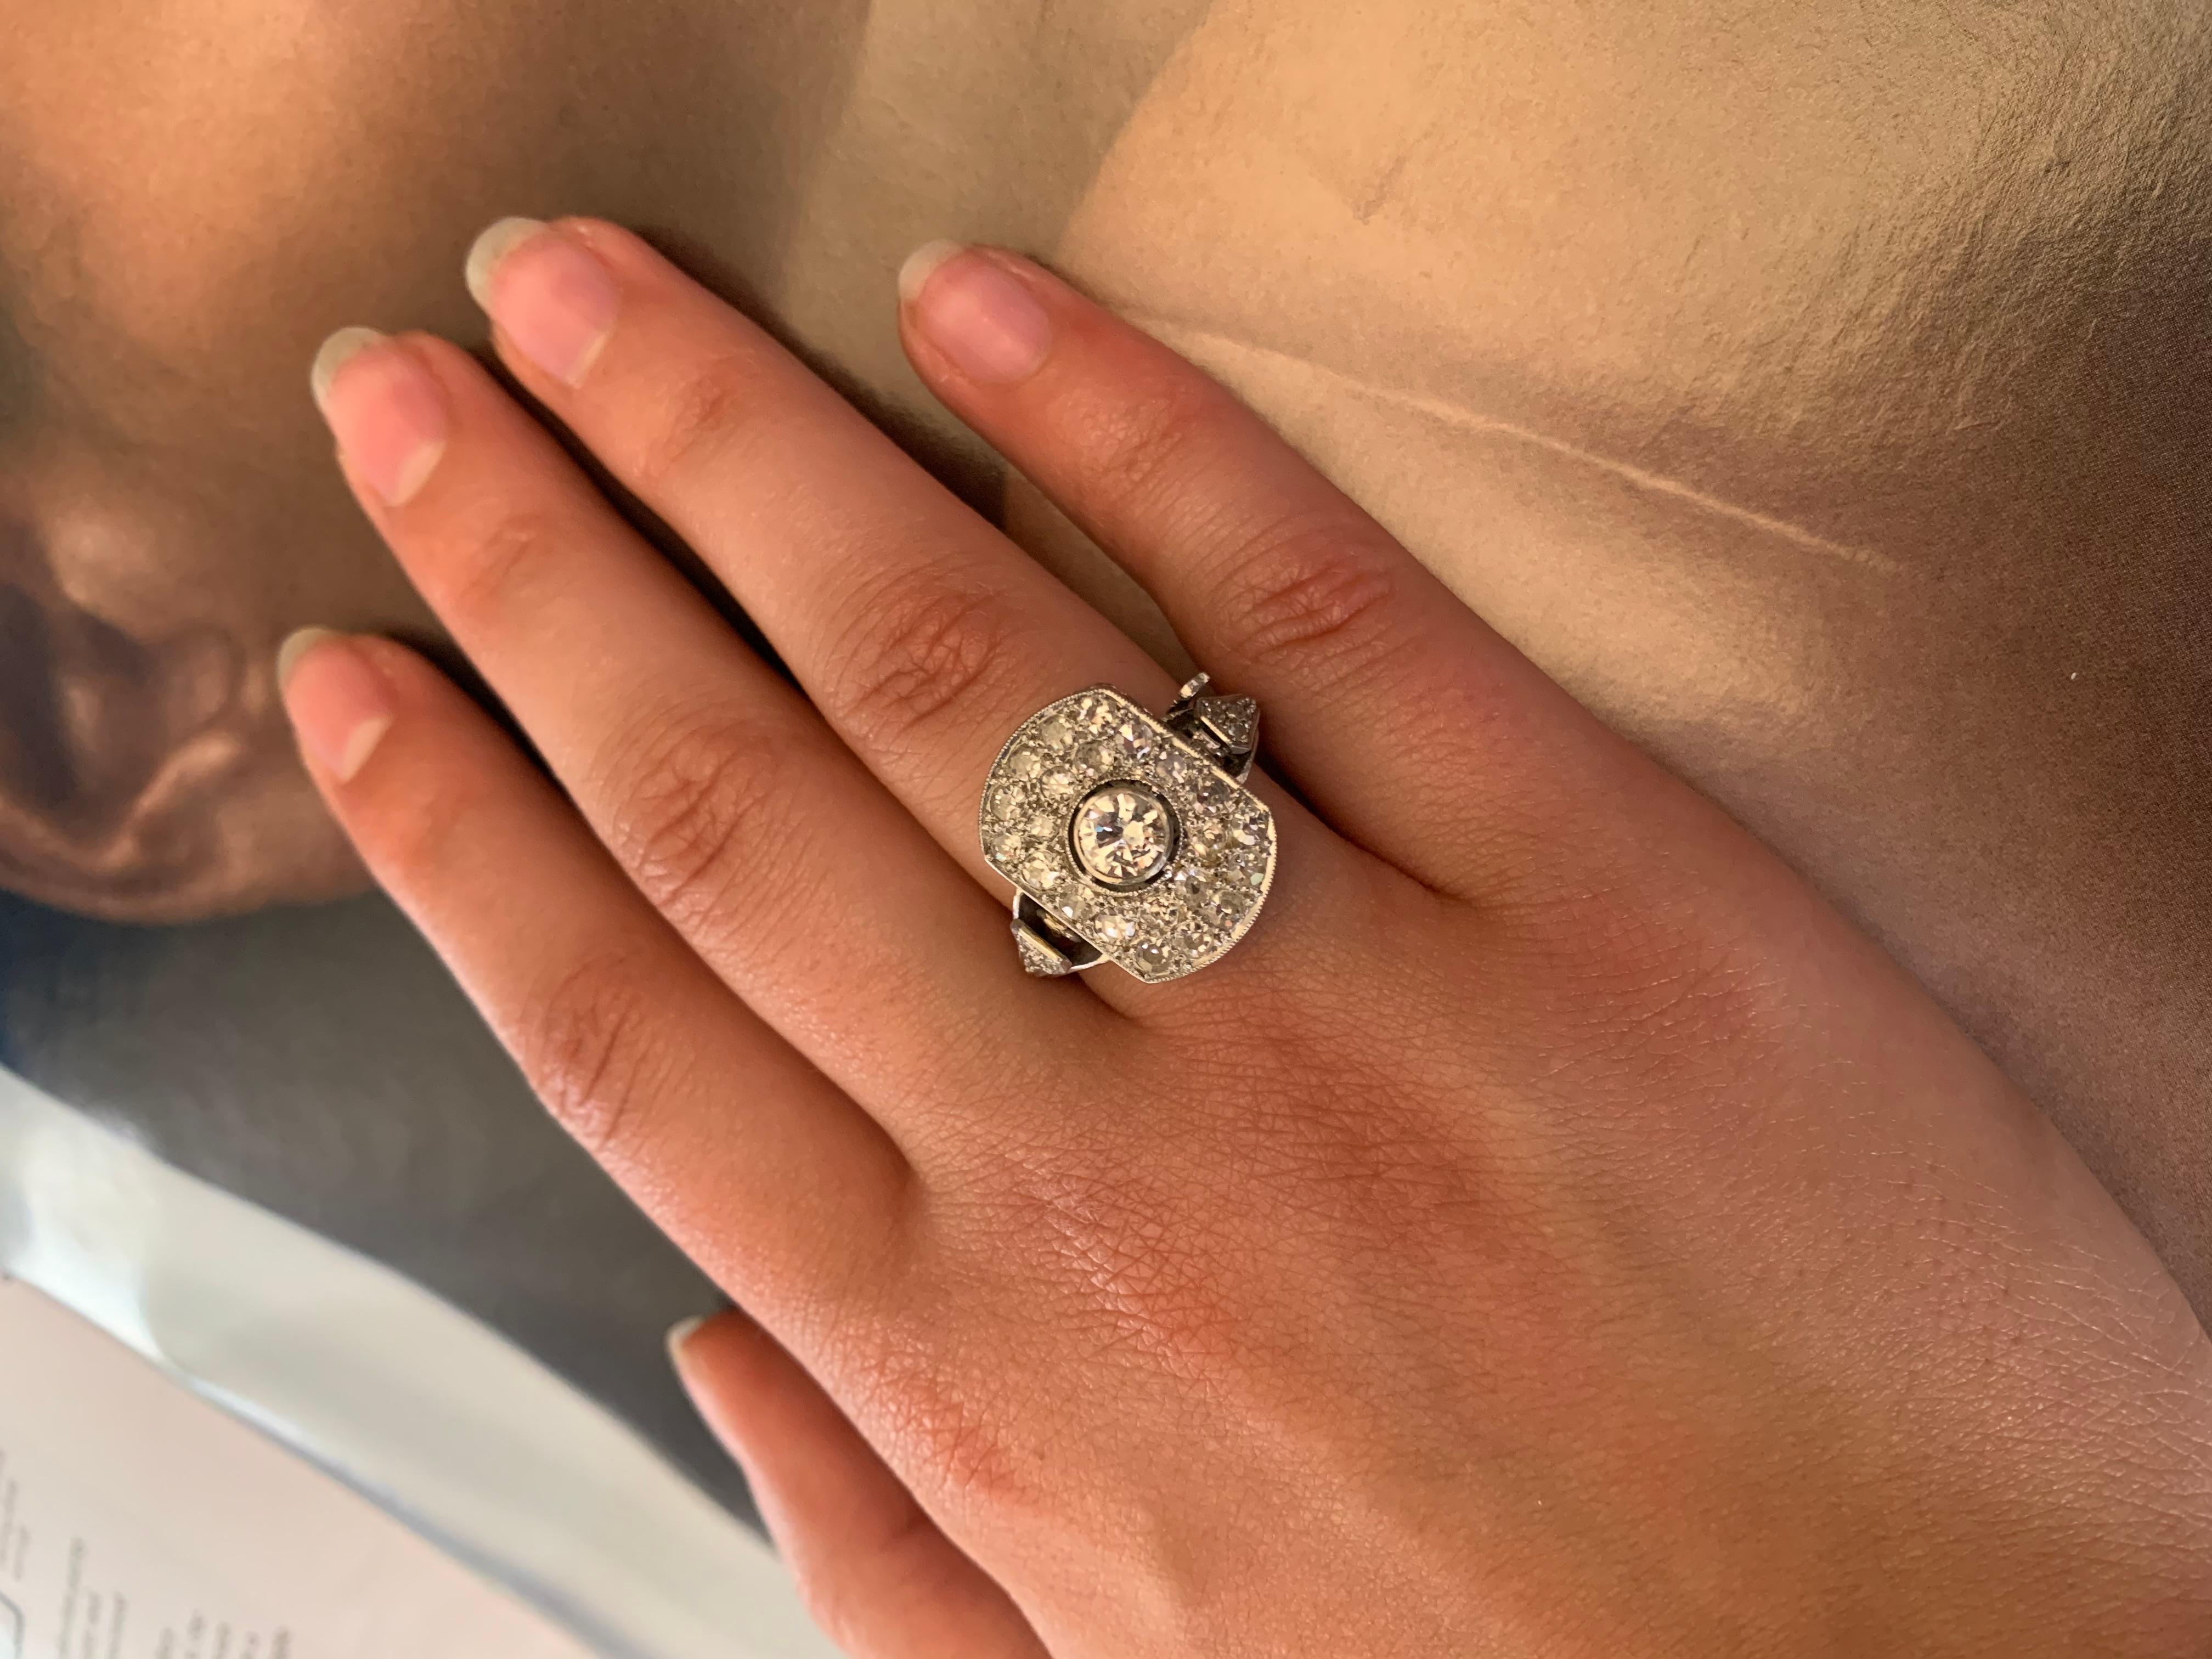 This striking, elegant Art Deco cocktail ring holds a delightful surprise- a miniature watch is revealed when you open the front diamond set filigree panel, making it a marvelous conversation piece. This unusual time piece is complex and well